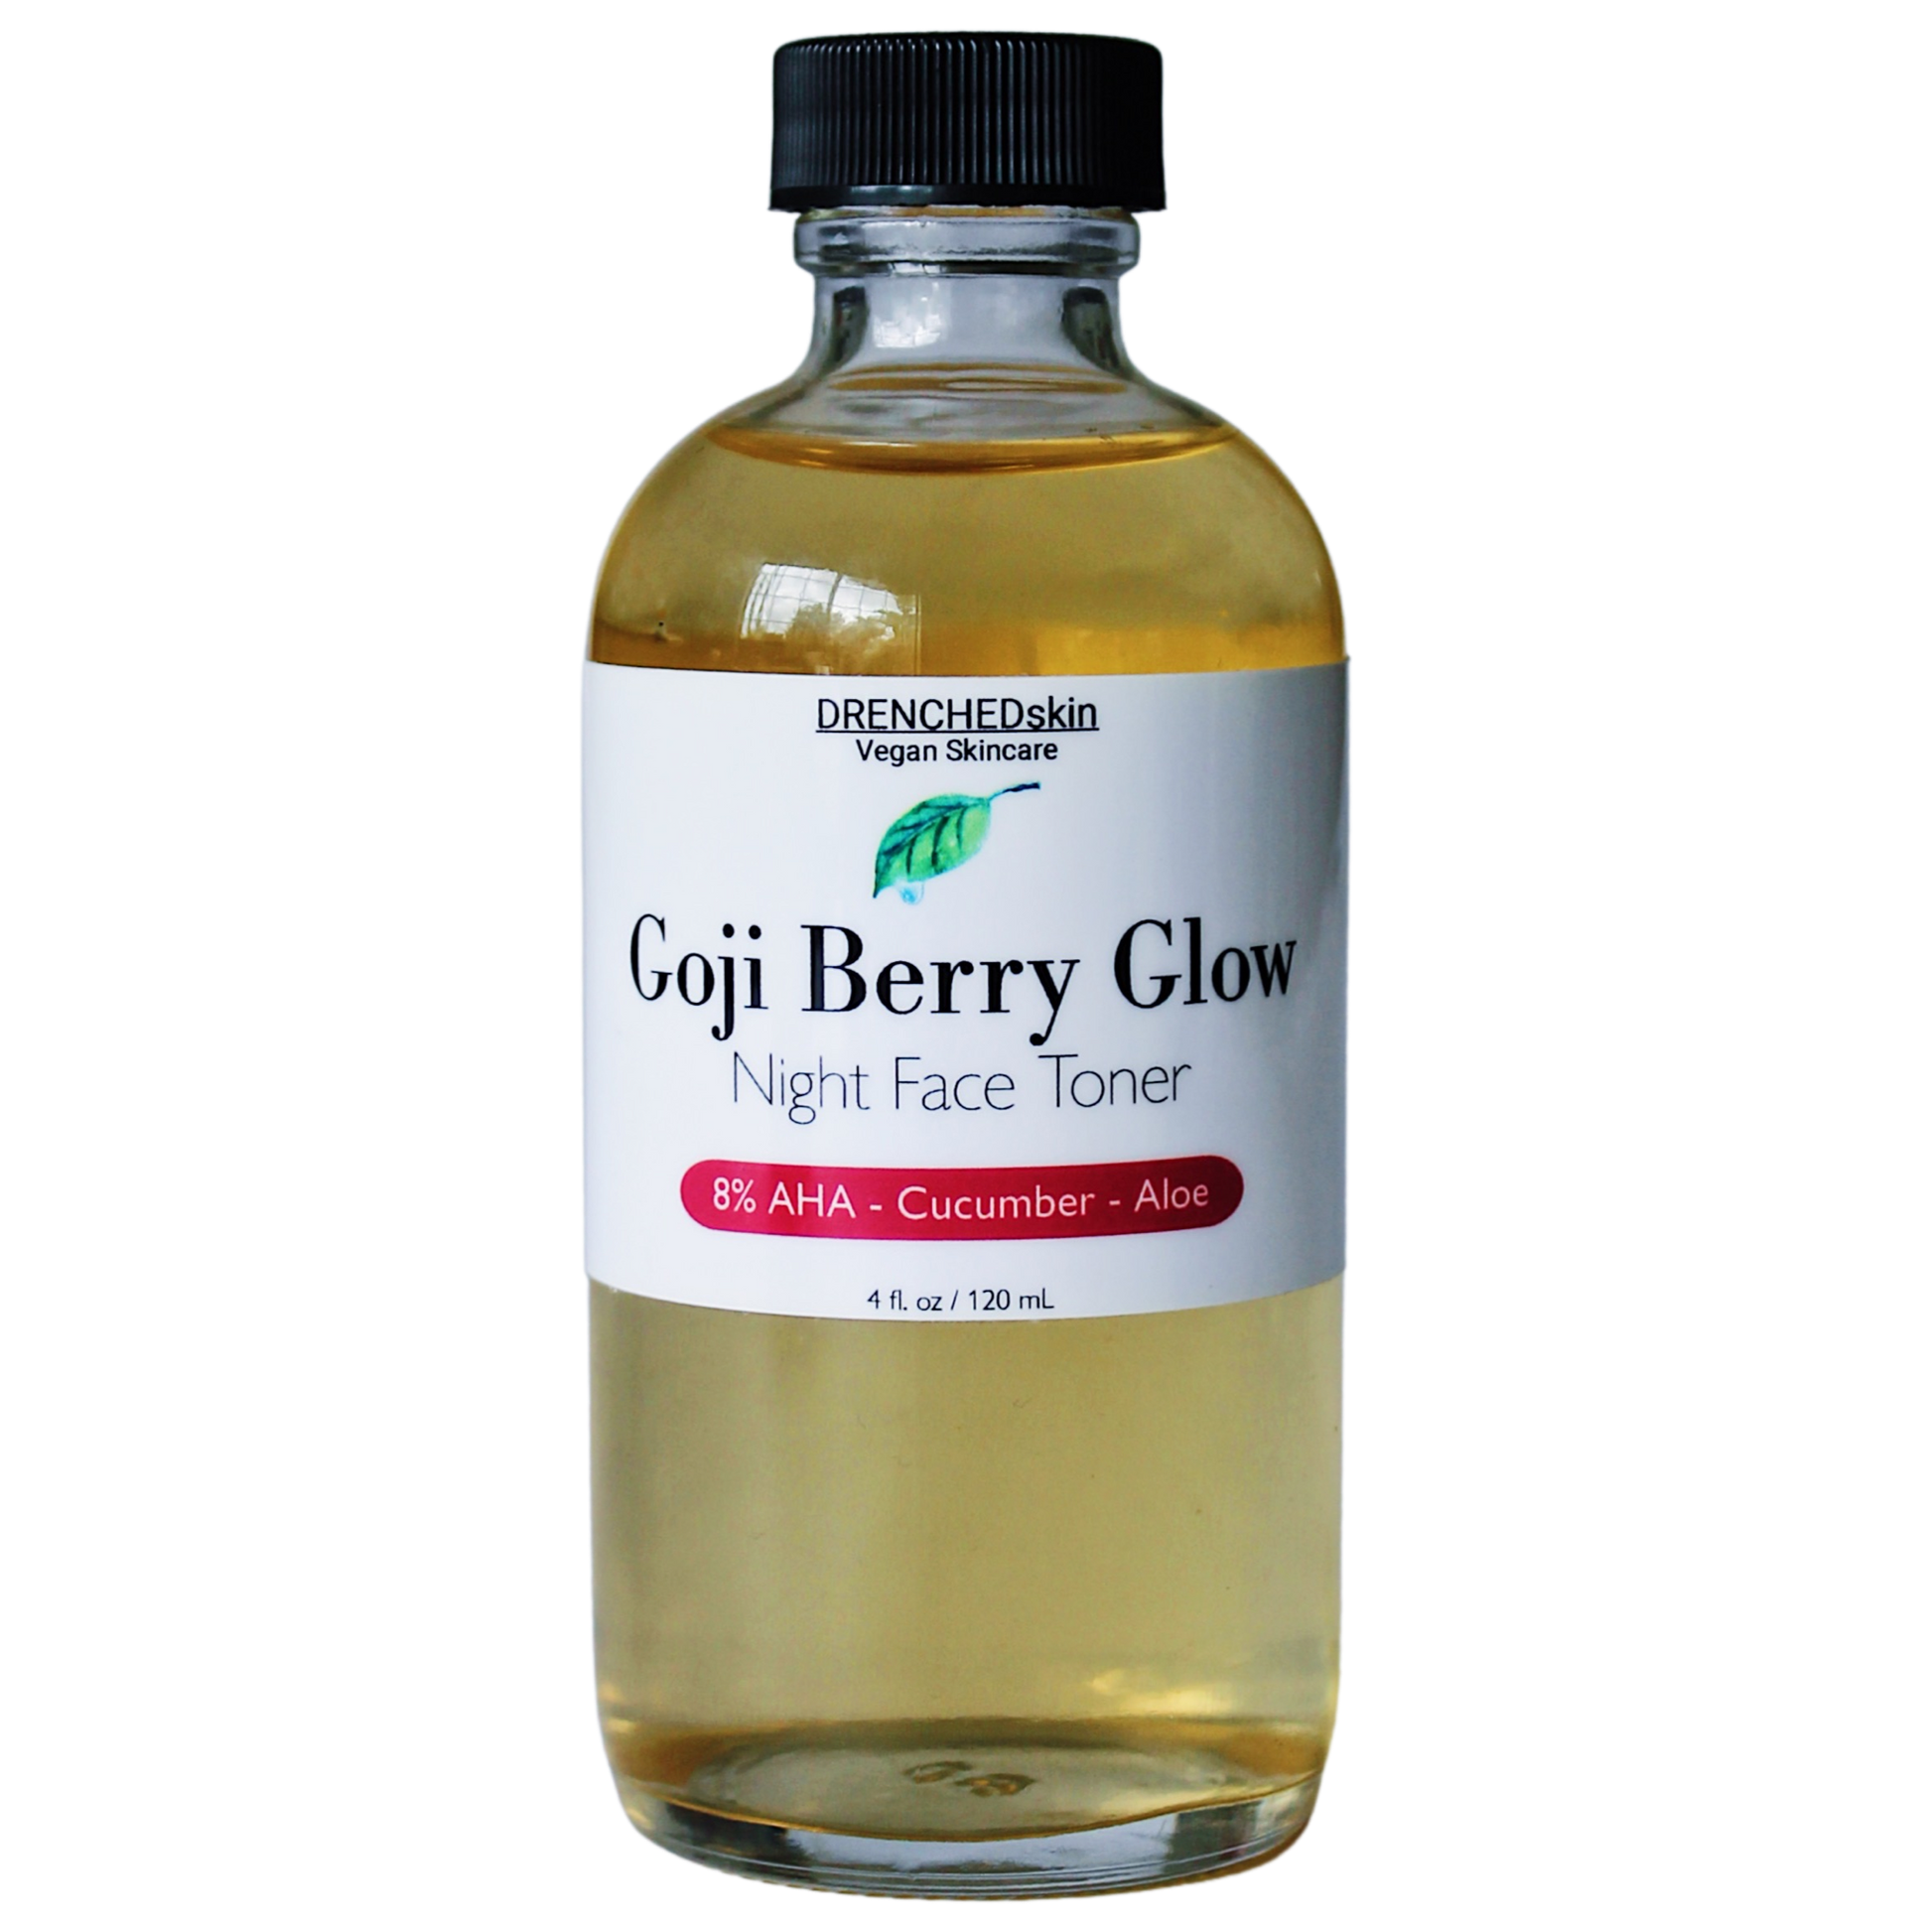 GOJI BERRY GLOW Night Time Face Toner - DRENCHEDskin®